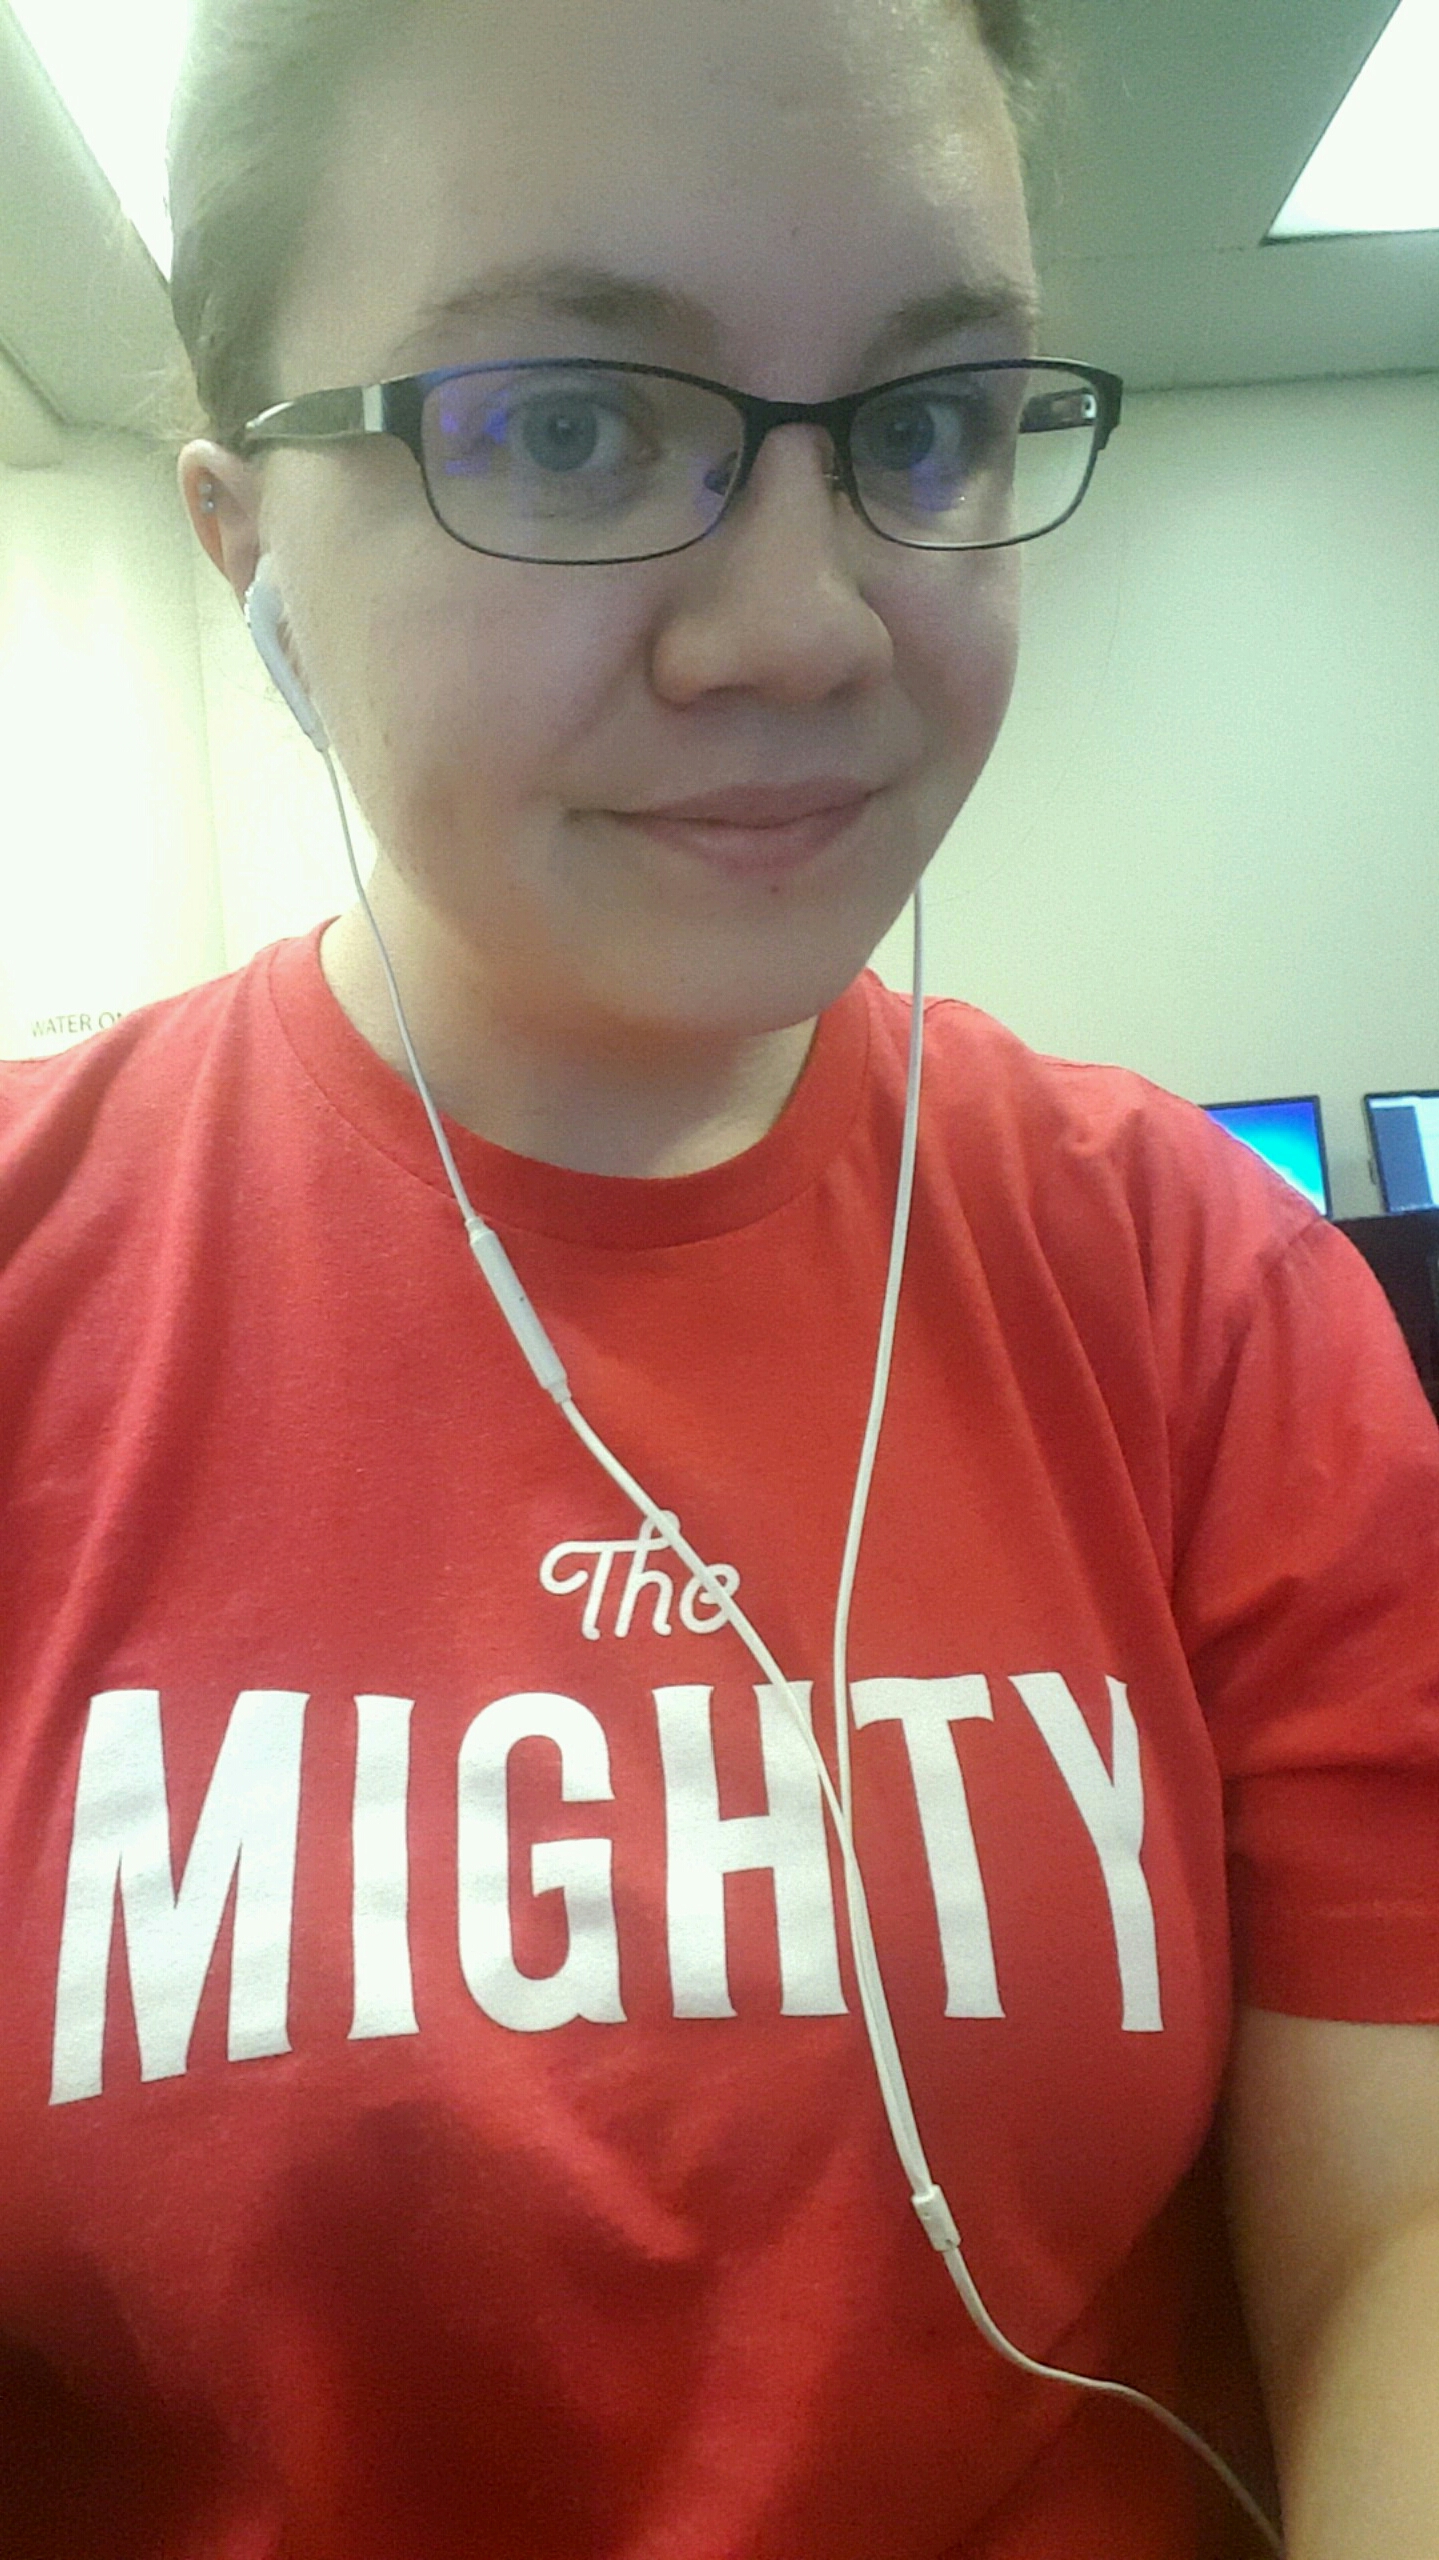 Alaura wearing red t-shirt with The Mighty logo